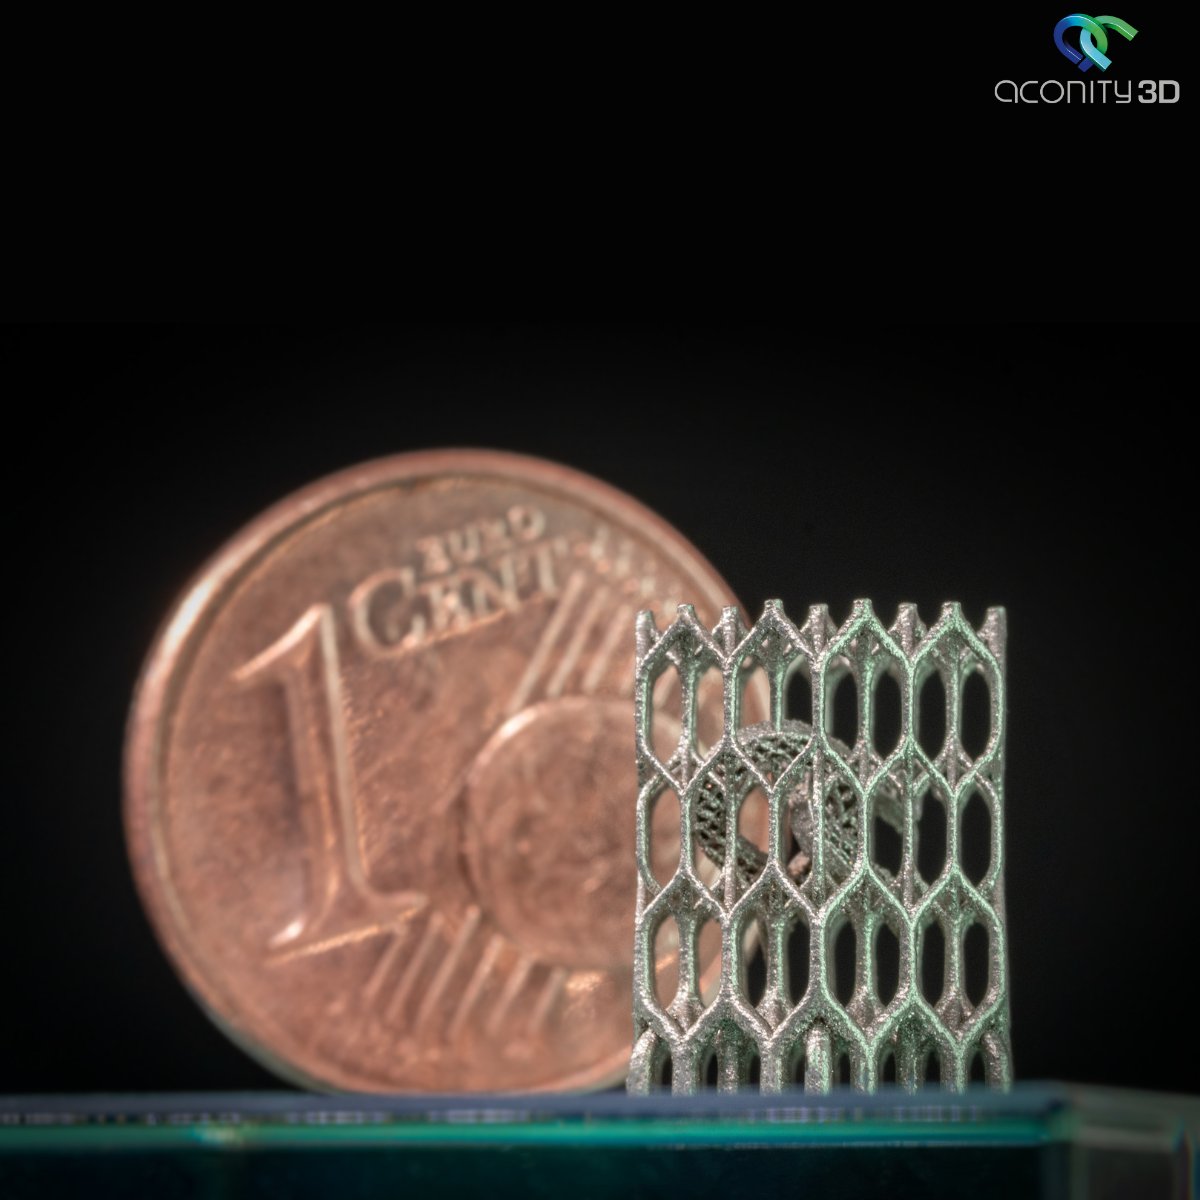 Do you remember our 1 cent coin for scale? Here it is again! 
And does the Lattice Demopart look familiar to you? 🤔 

Part: Lattice Demopart
Material: 316L
Machine: Aconity𝙈𝙄𝘾𝙍𝙊

#3DPrinting #LPBF #AdditiveManufacturing #lattice #AC3D #Aachen #coinforscale #partoftheweek